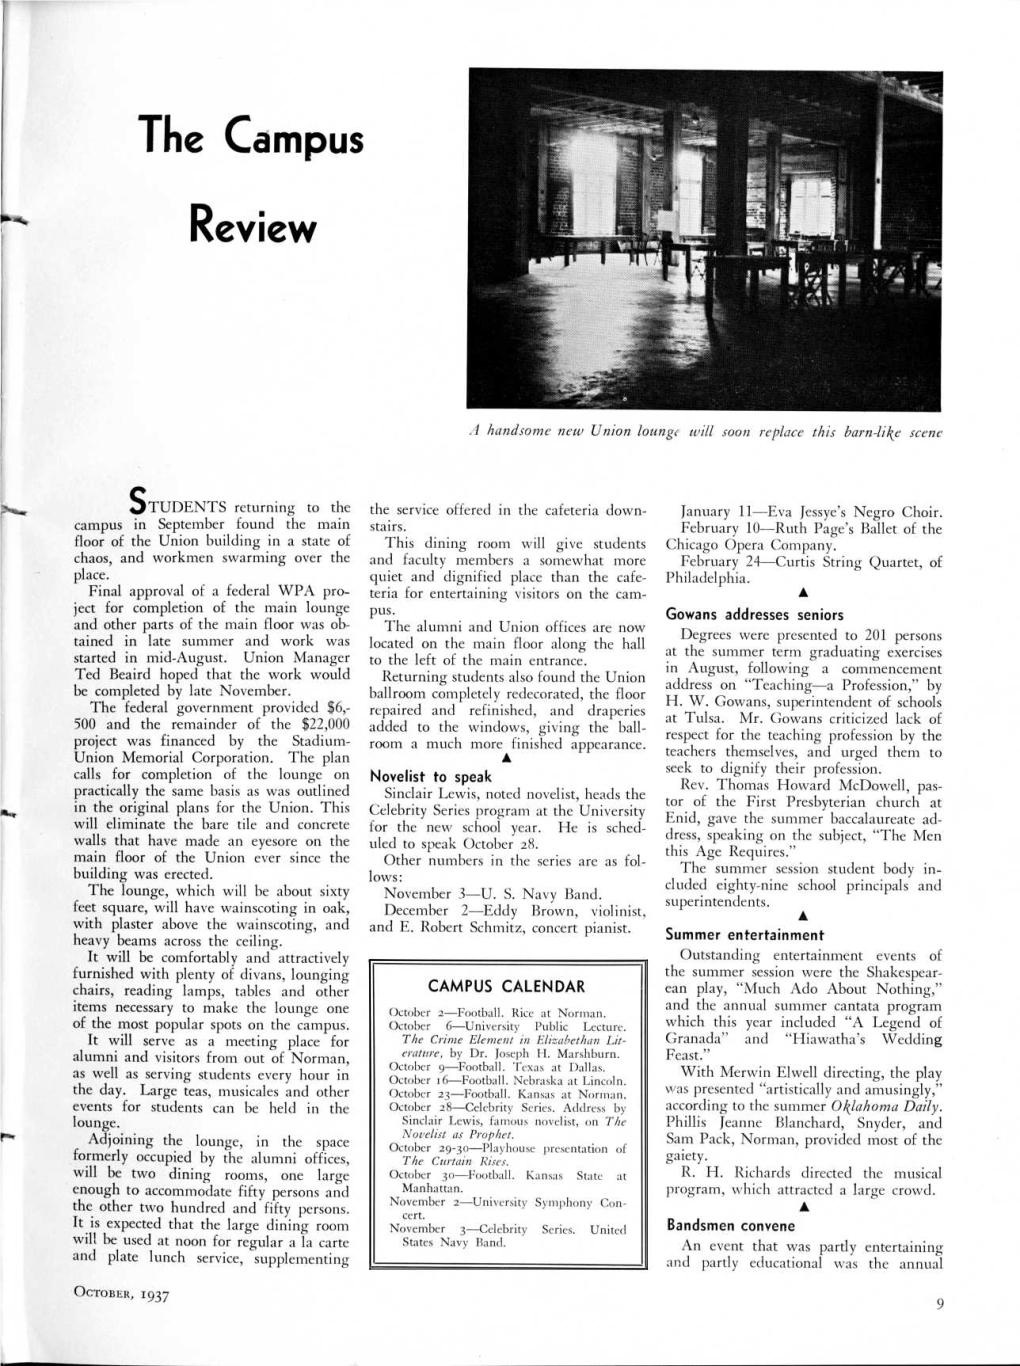 The Campus Review